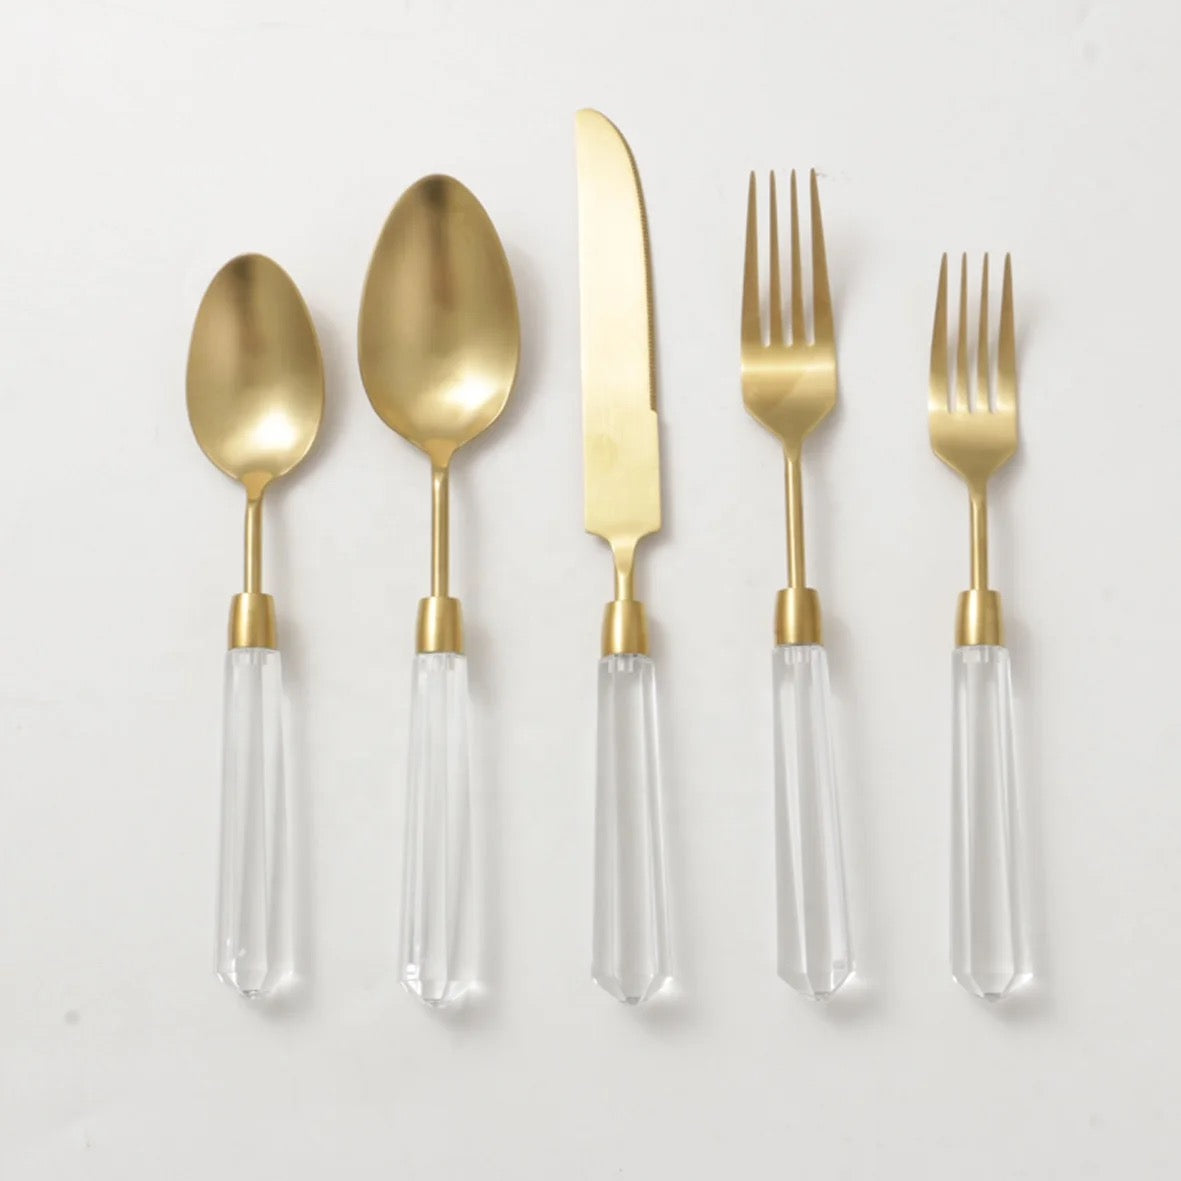 GOLD Flatware Set With CLEAR Handles